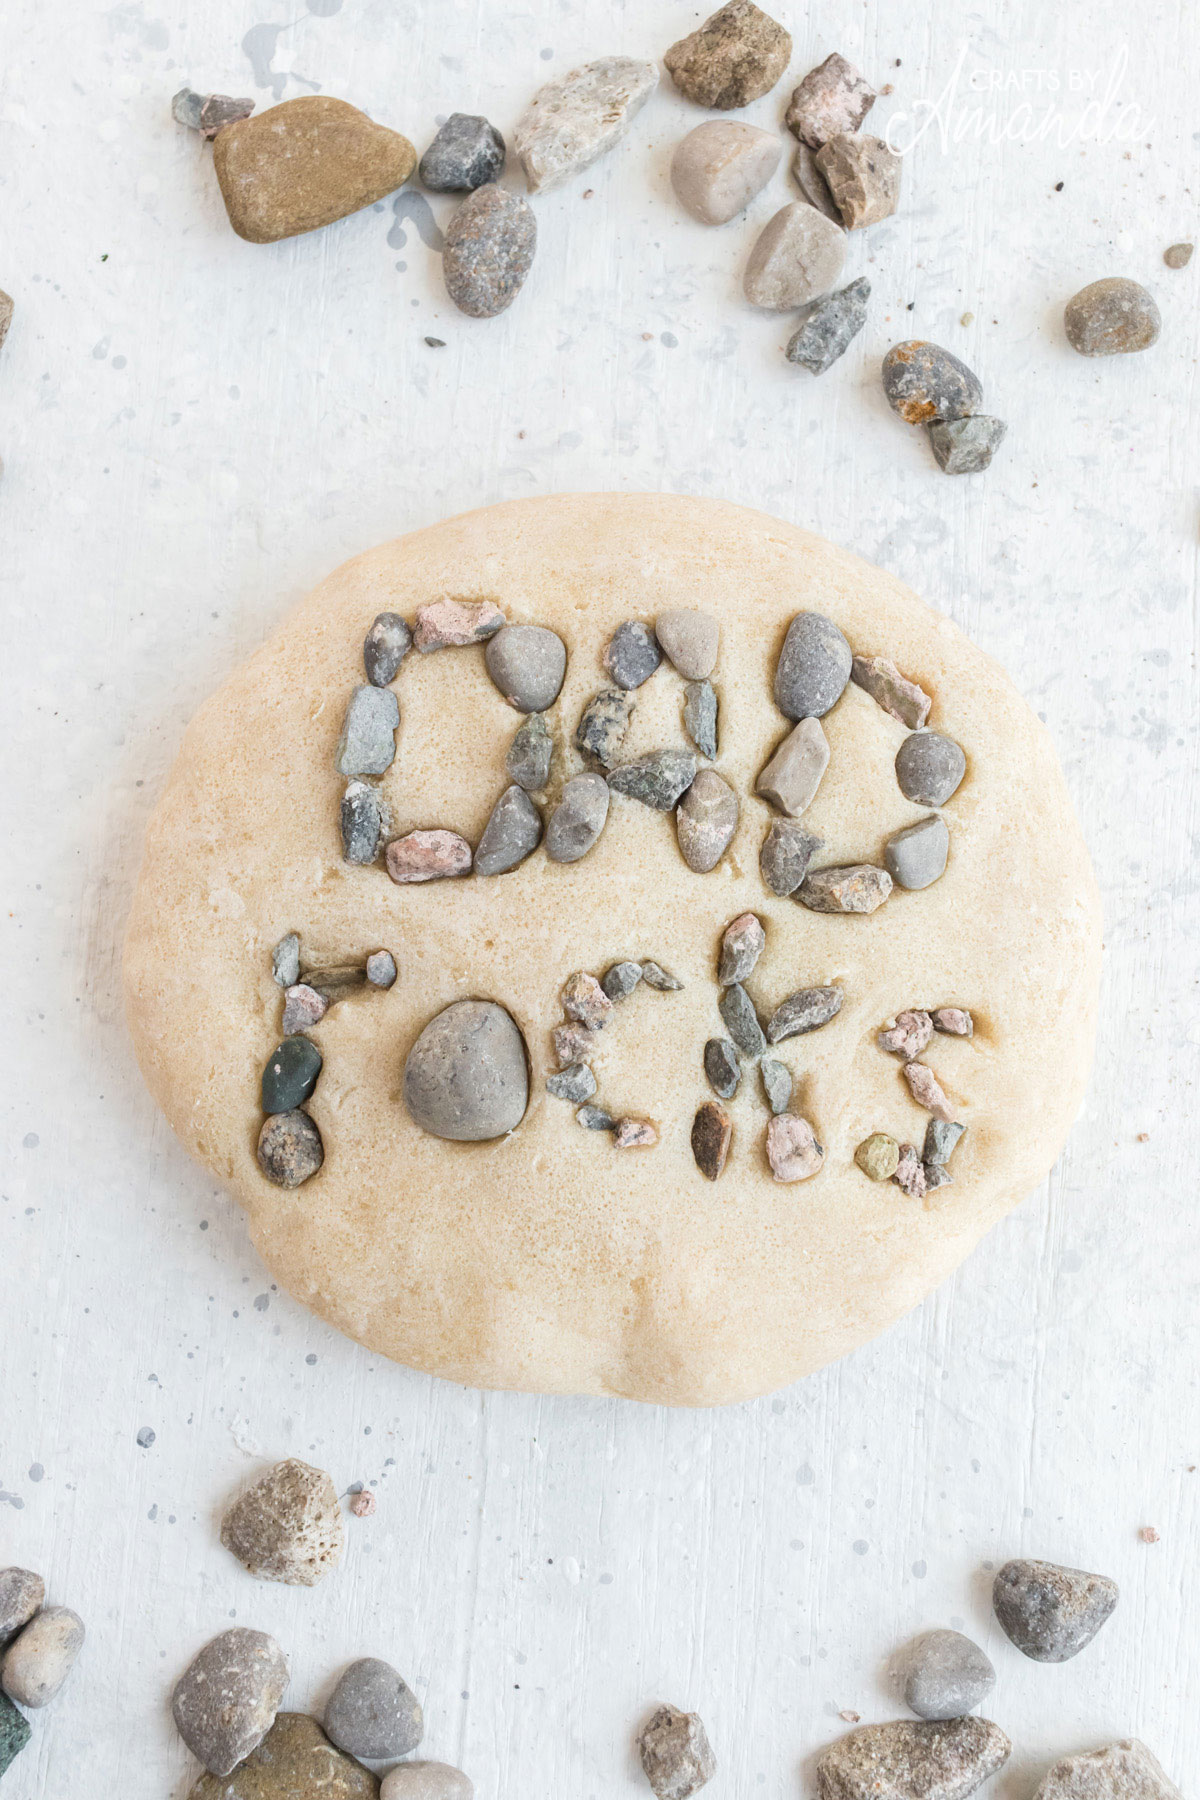 salt dough paperweight that spells out dad rocks in actual rocks